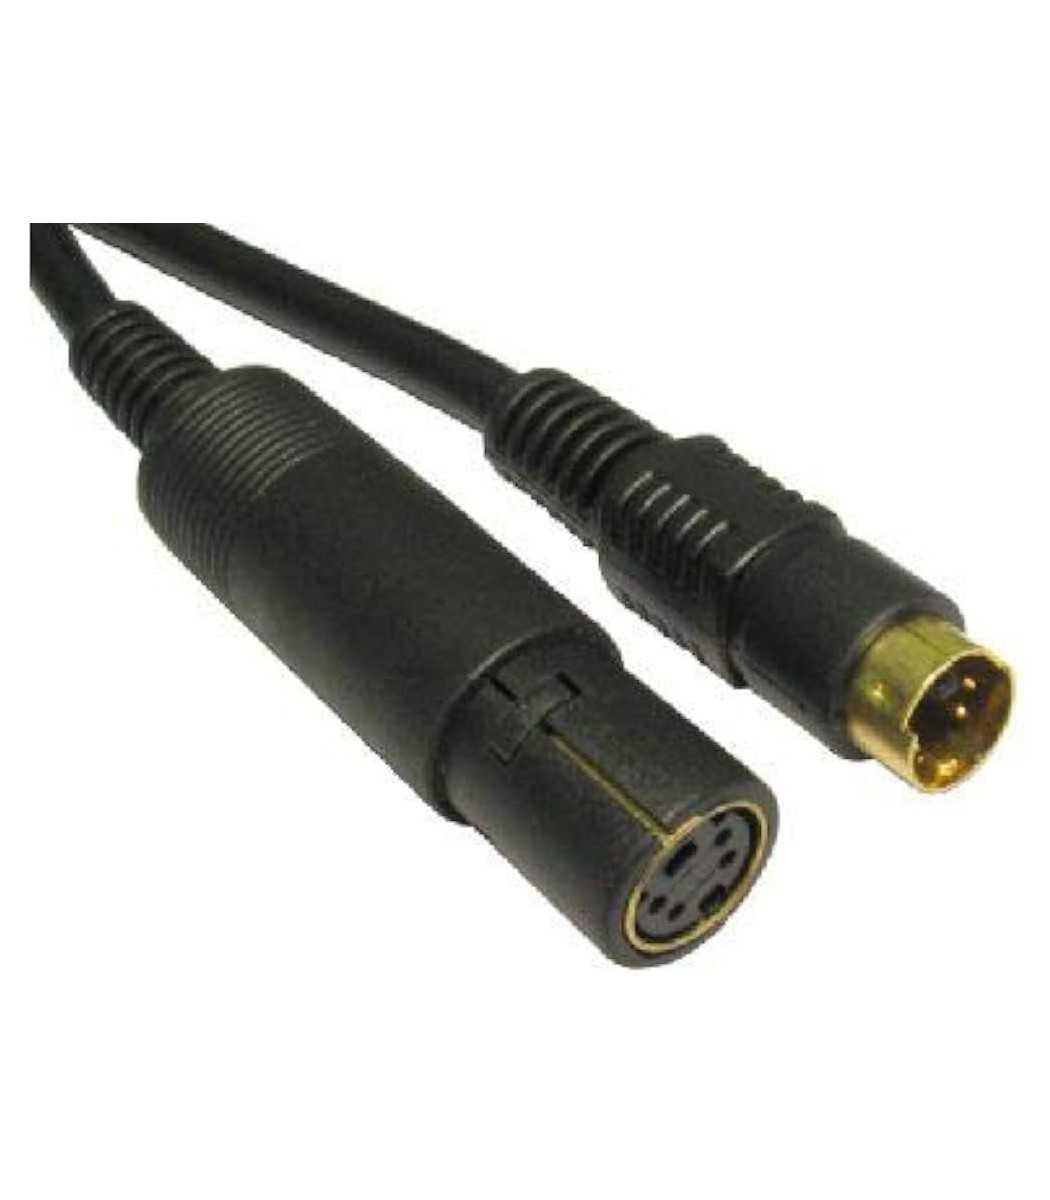 5m SVHS S-Video EXTENSION Cable Lead 4Pin Mini Din Male to Female TV DVD GOLD